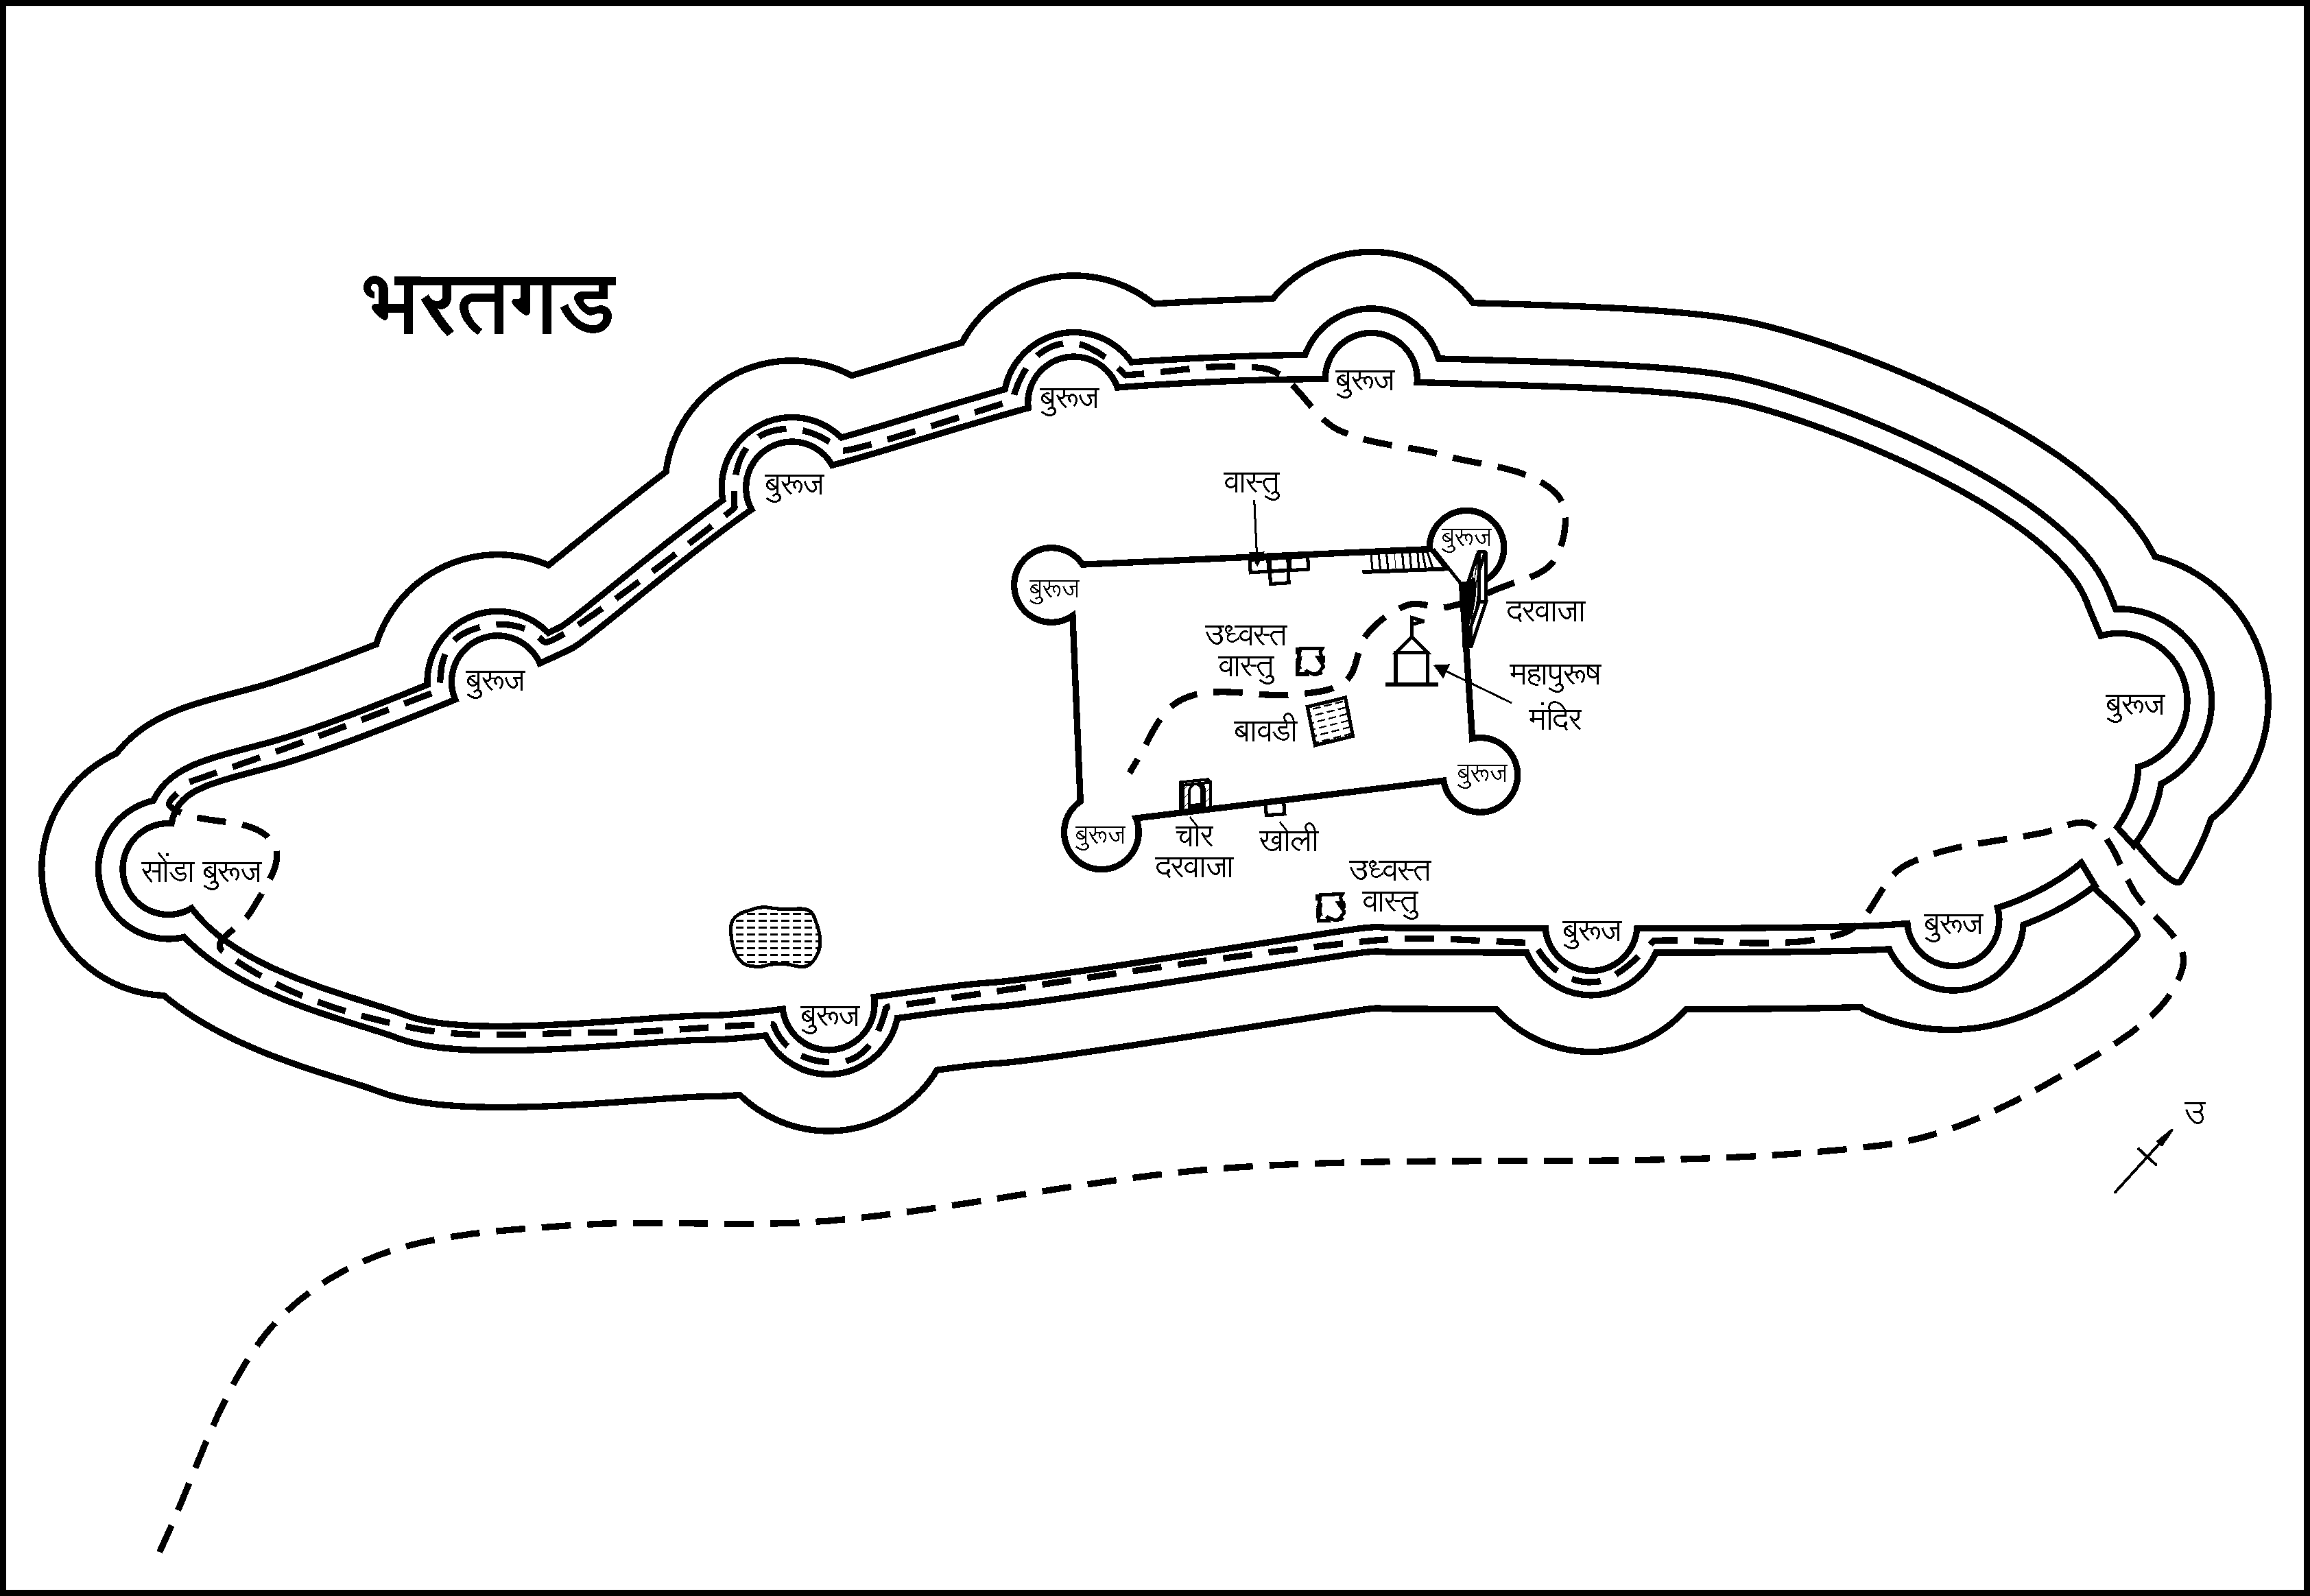 Fort map of Bharatgad.